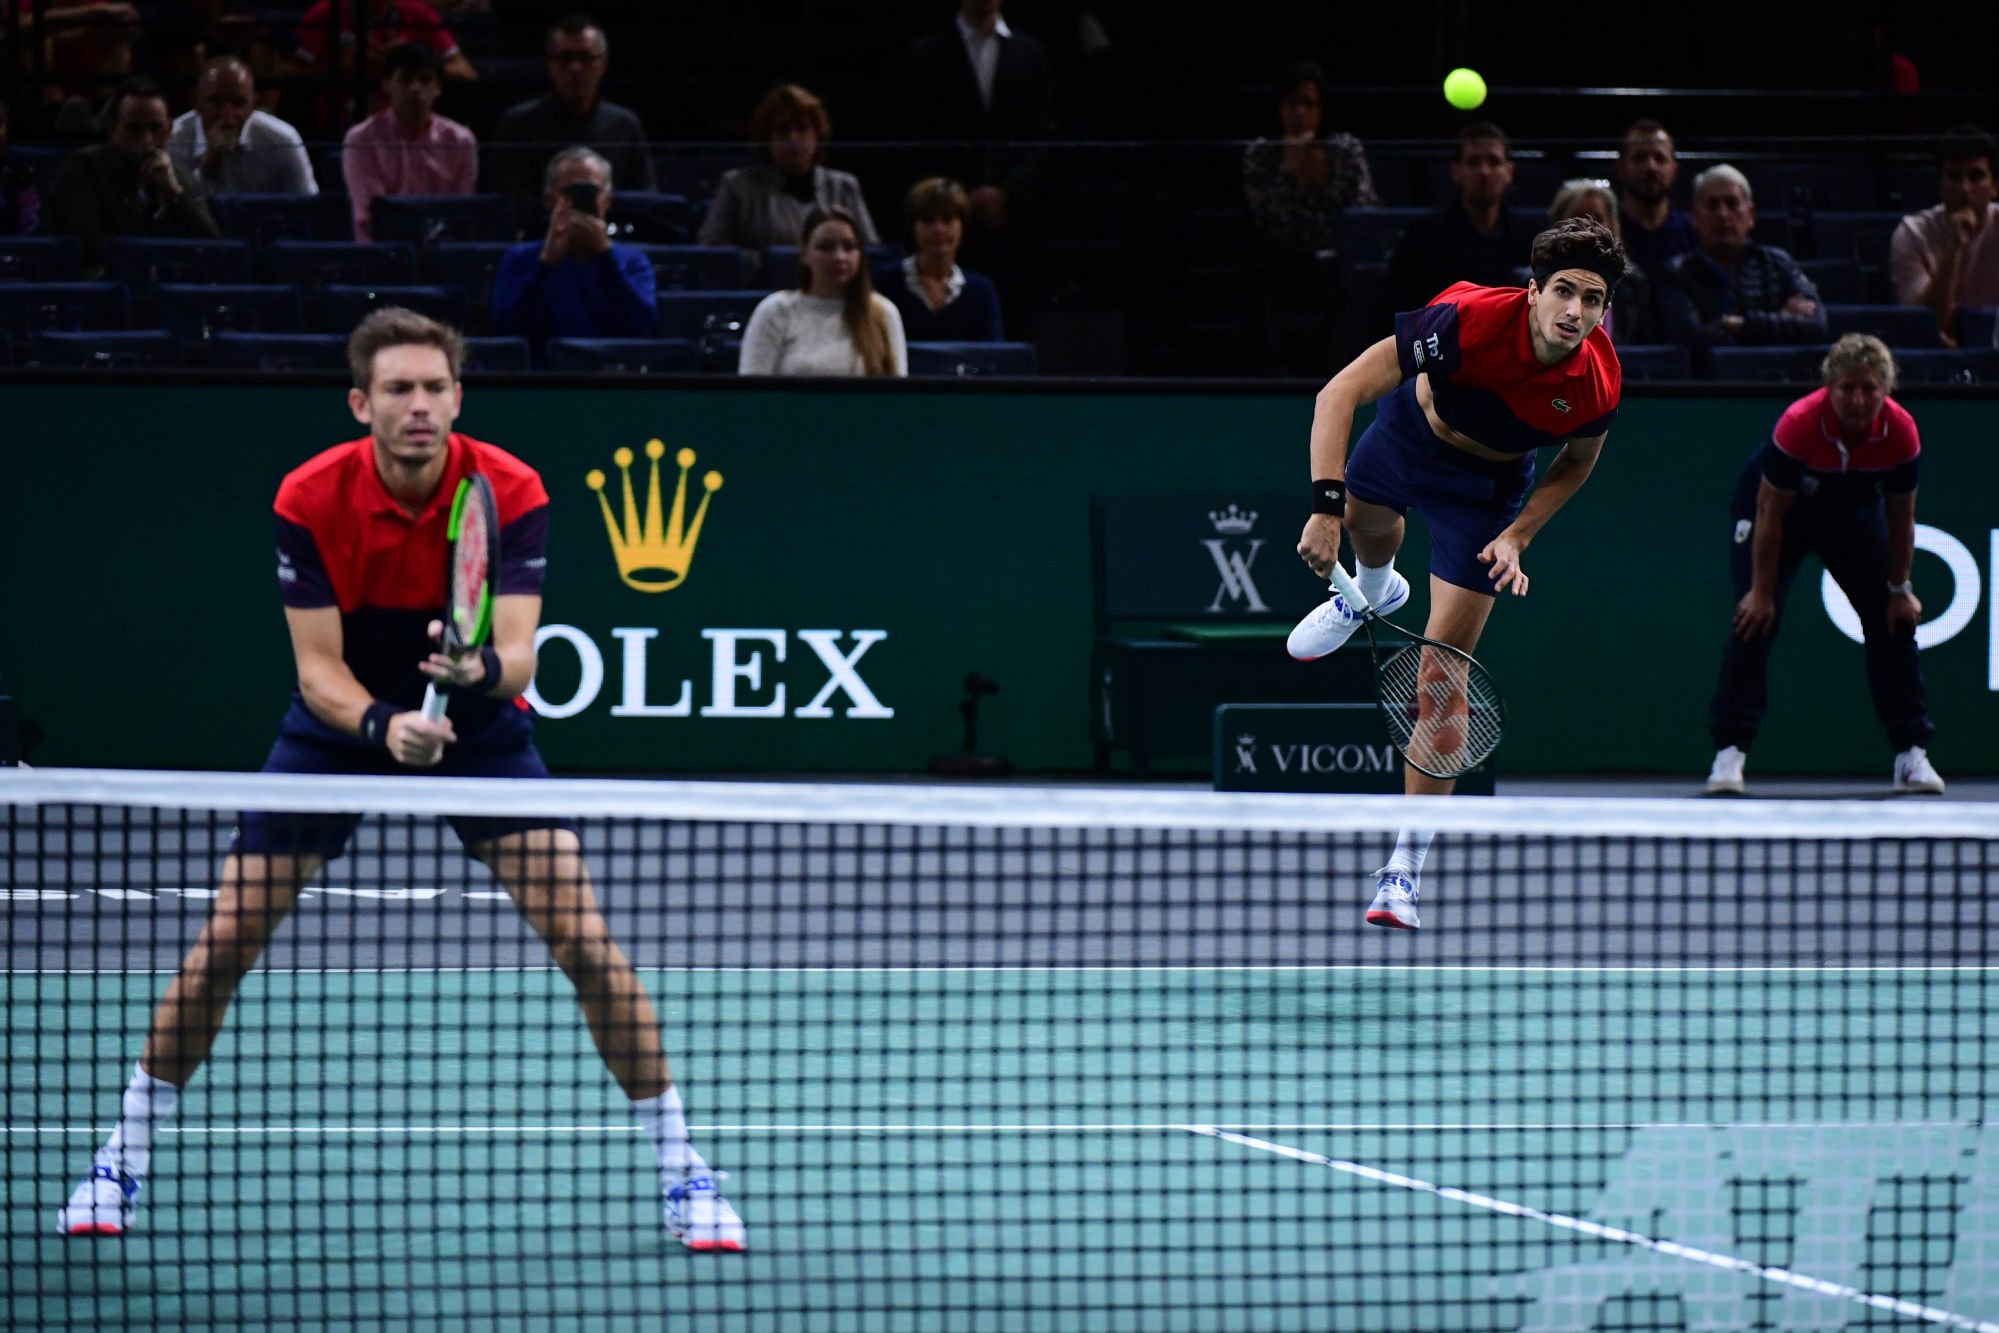 (R-L) Pierre Hugues HERBERT of France and Nicolas MAHUT of France during the Final of the Rolex Paris Masters at AccorHotels Arena on November 3, 2019 in Paris, France. (Photo by Dave Winter/Icon Sport) - Nicolas MAHUT - Pierre Hugues HERBERT - Bercy AccorHotels Arena - Paris (France)